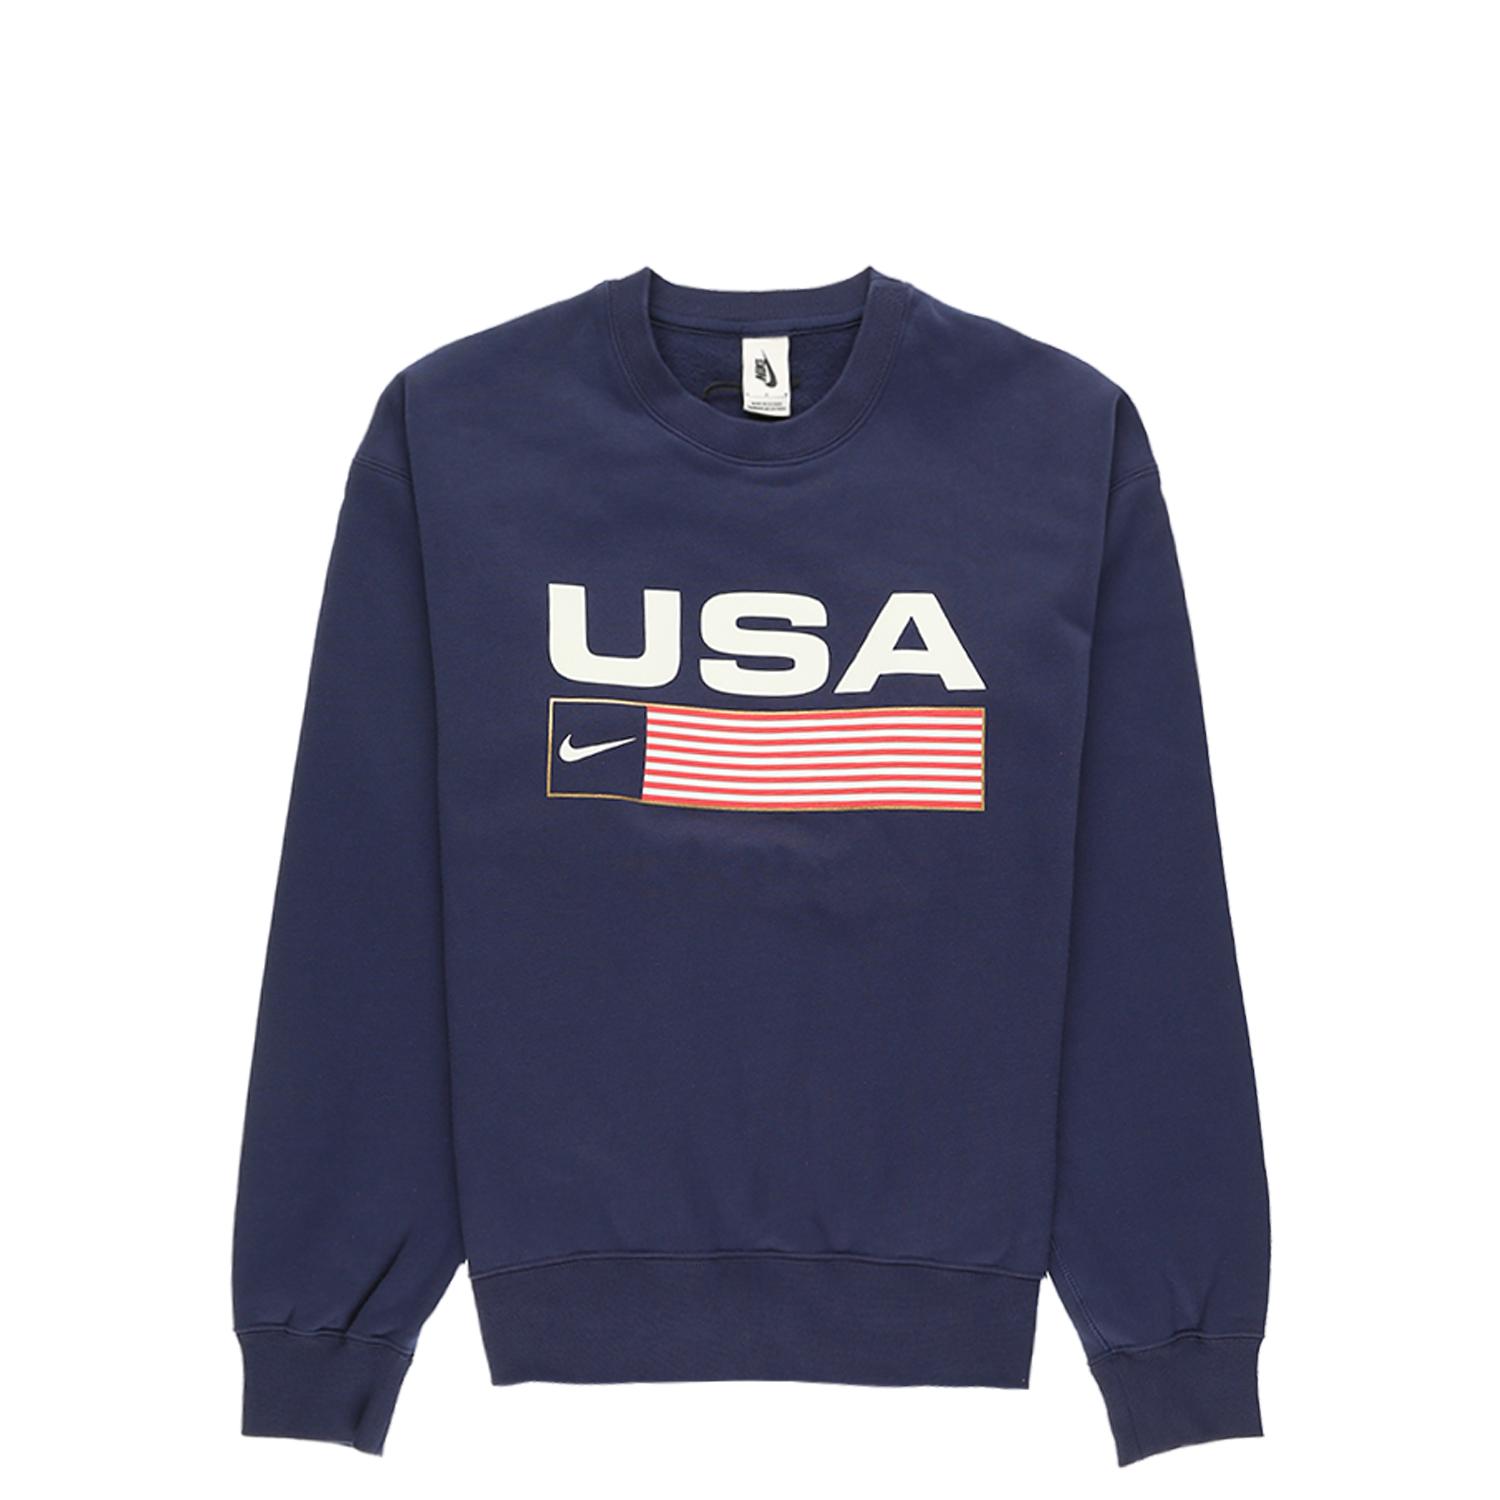 Nike Cotton Swoosh Striped Crewneck in Midnight Navy (Blue) for Men - Lyst